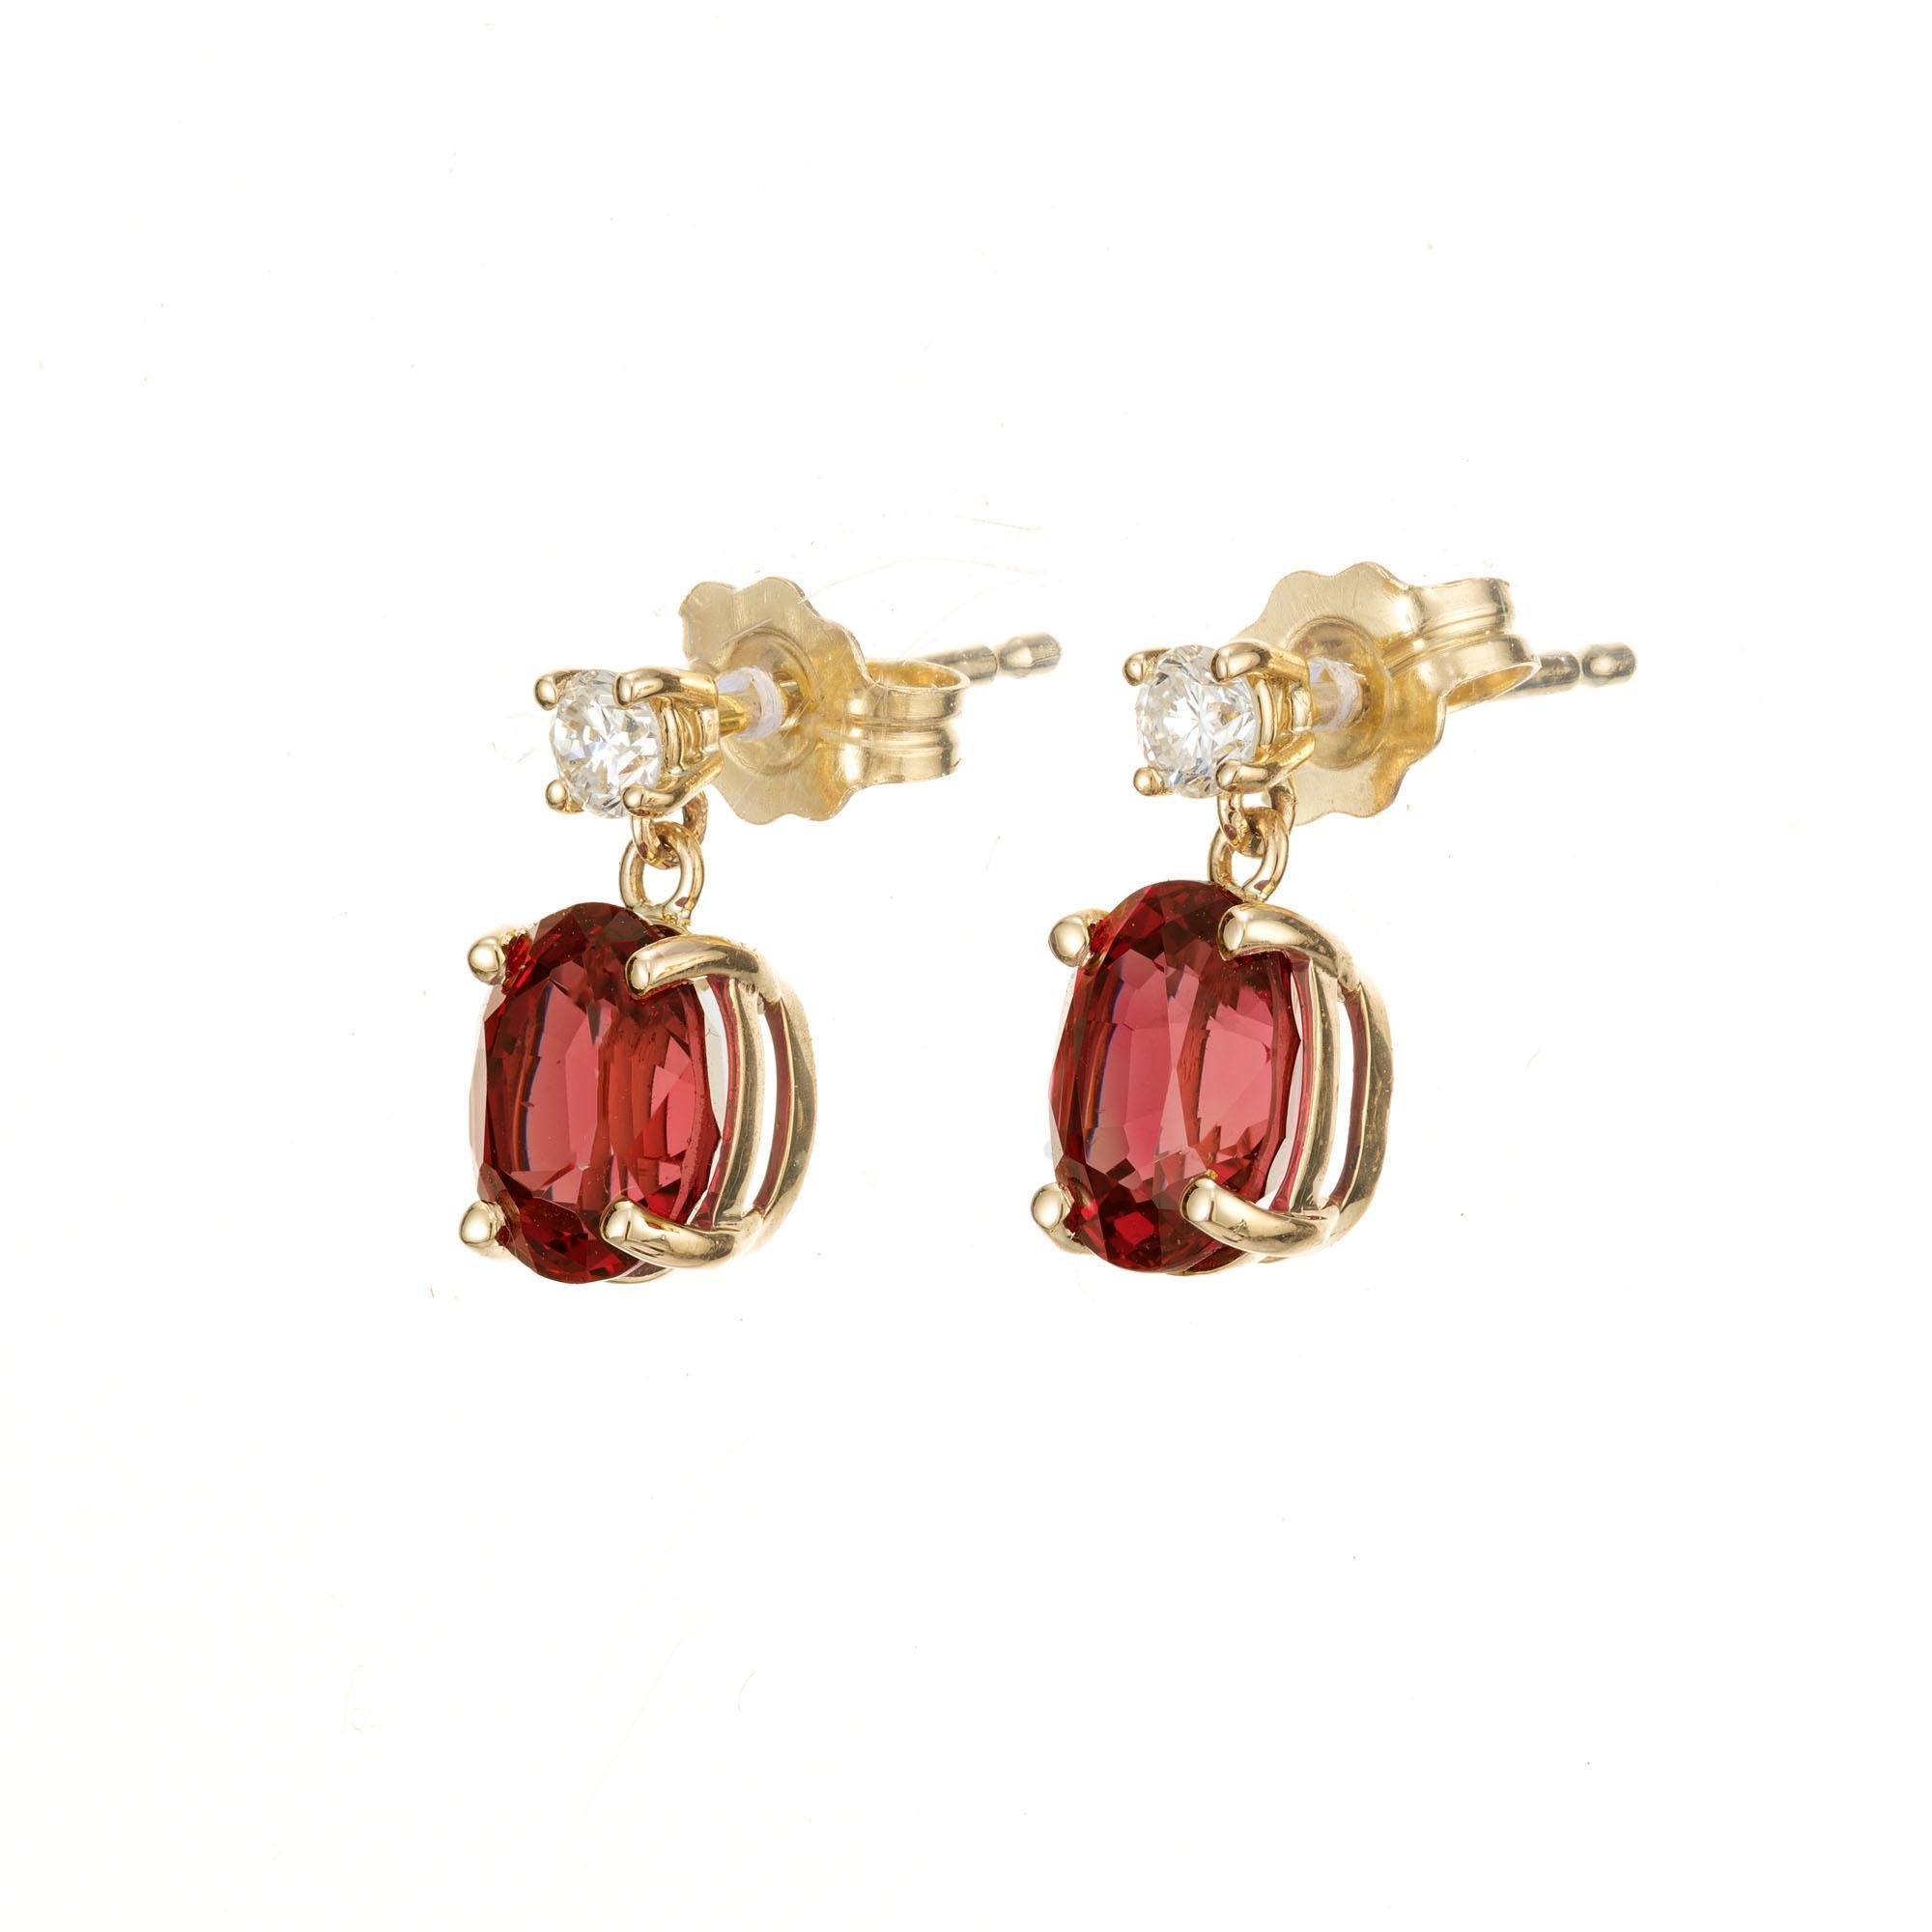 Oval spinel and round diamond earrings. 2 round brilliant cut diamonds with 2 oval red natural, untreated spinel dangles. The spinels are circa 1950's. Designed and crafted in the Peter Suchy workshop

2 oval red spinel's, VS approx. 2.04cts
2 round